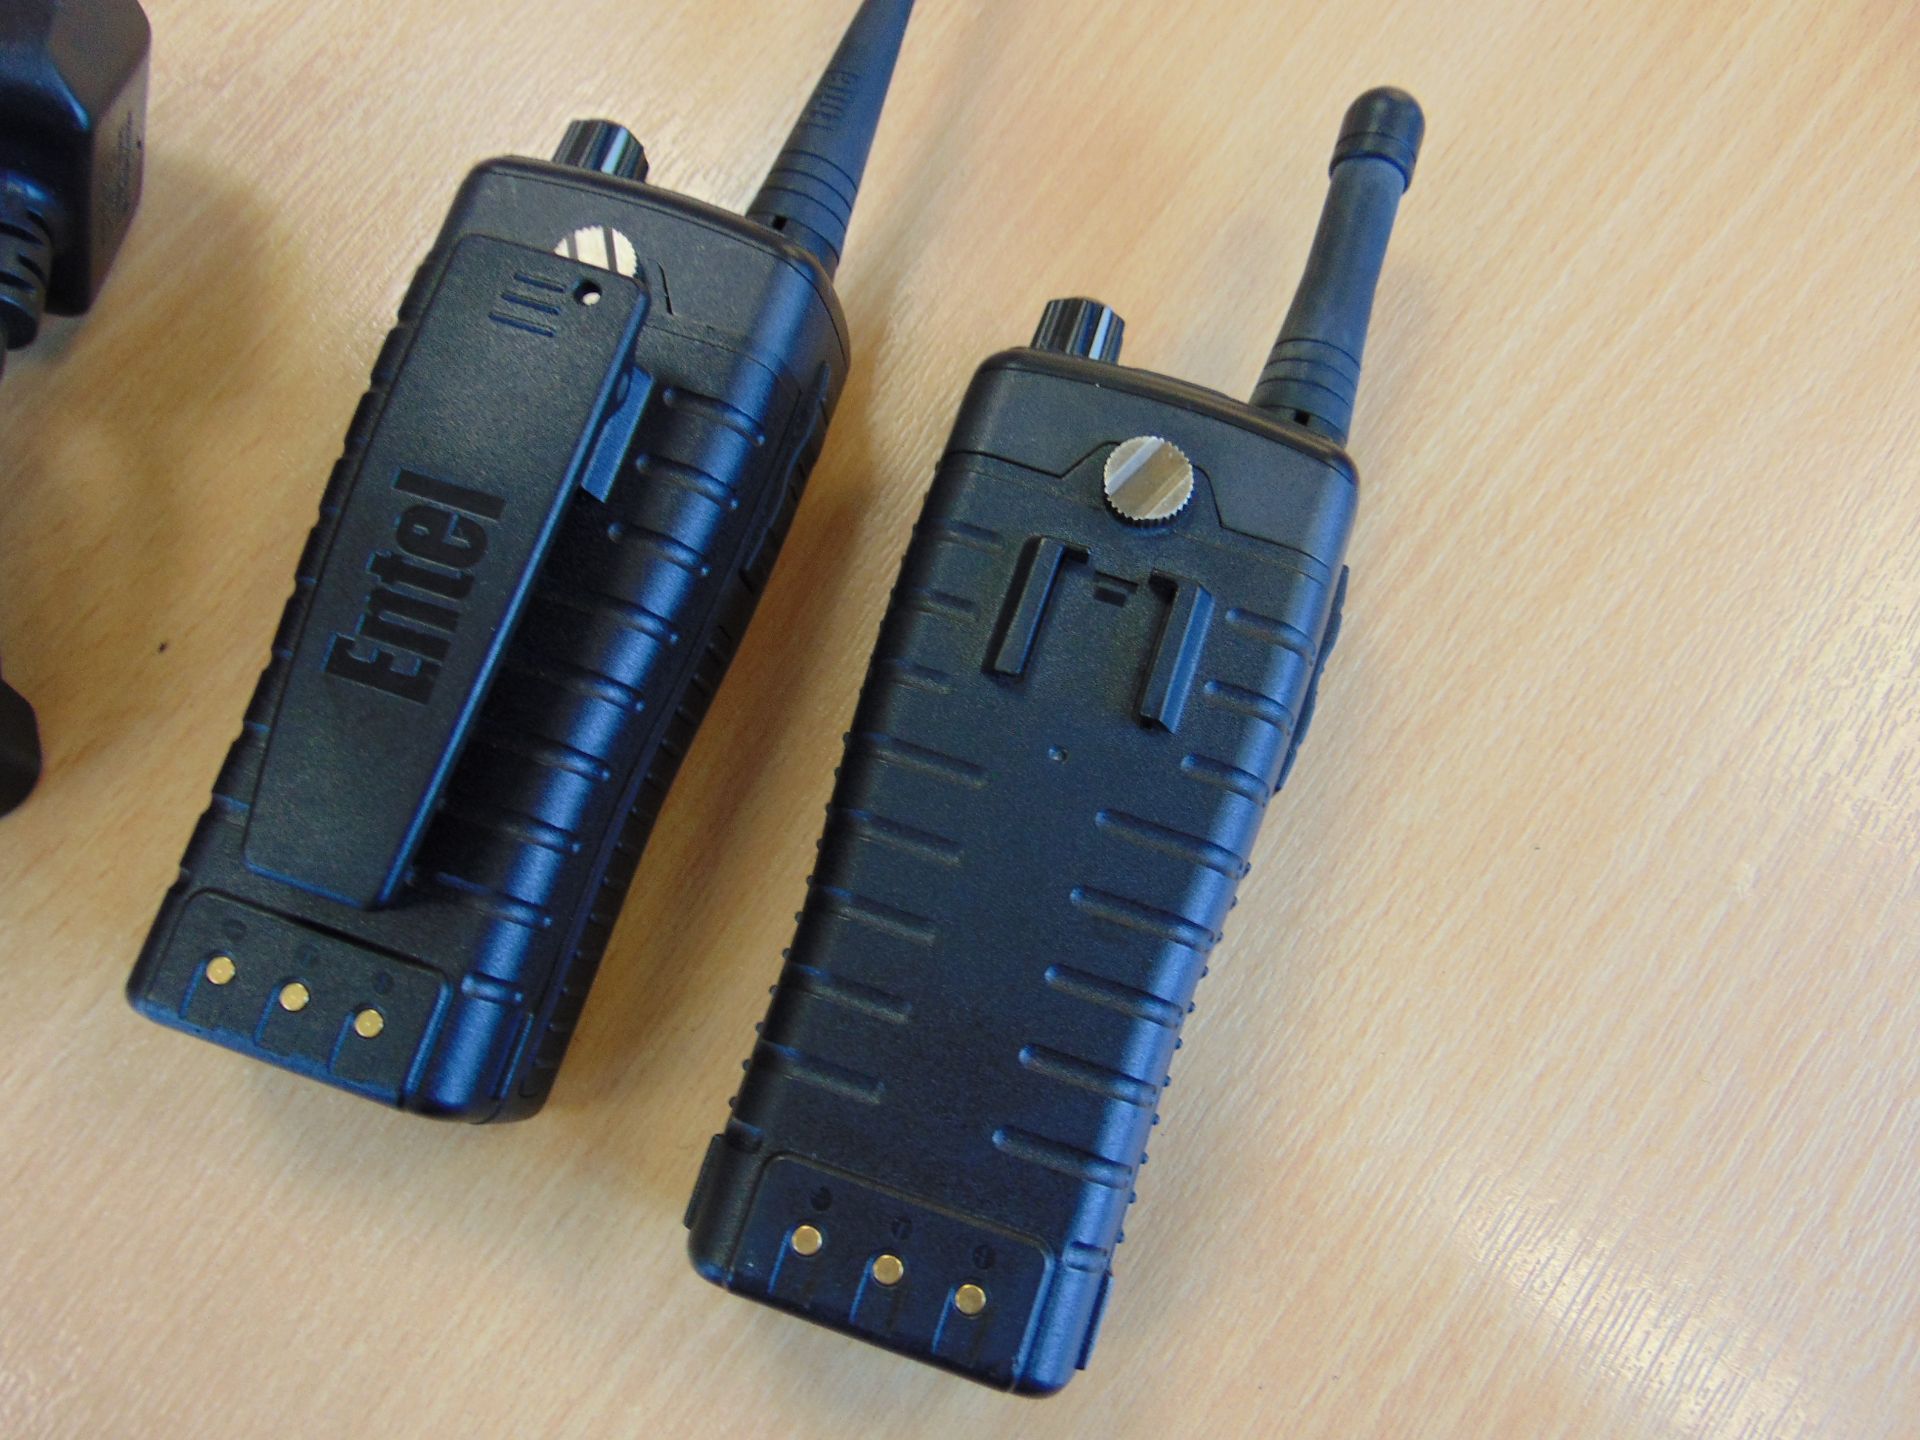 2x Entel HT782 UHF Waterproof Two Way Radios C/W Battery Charger - Image 4 of 6